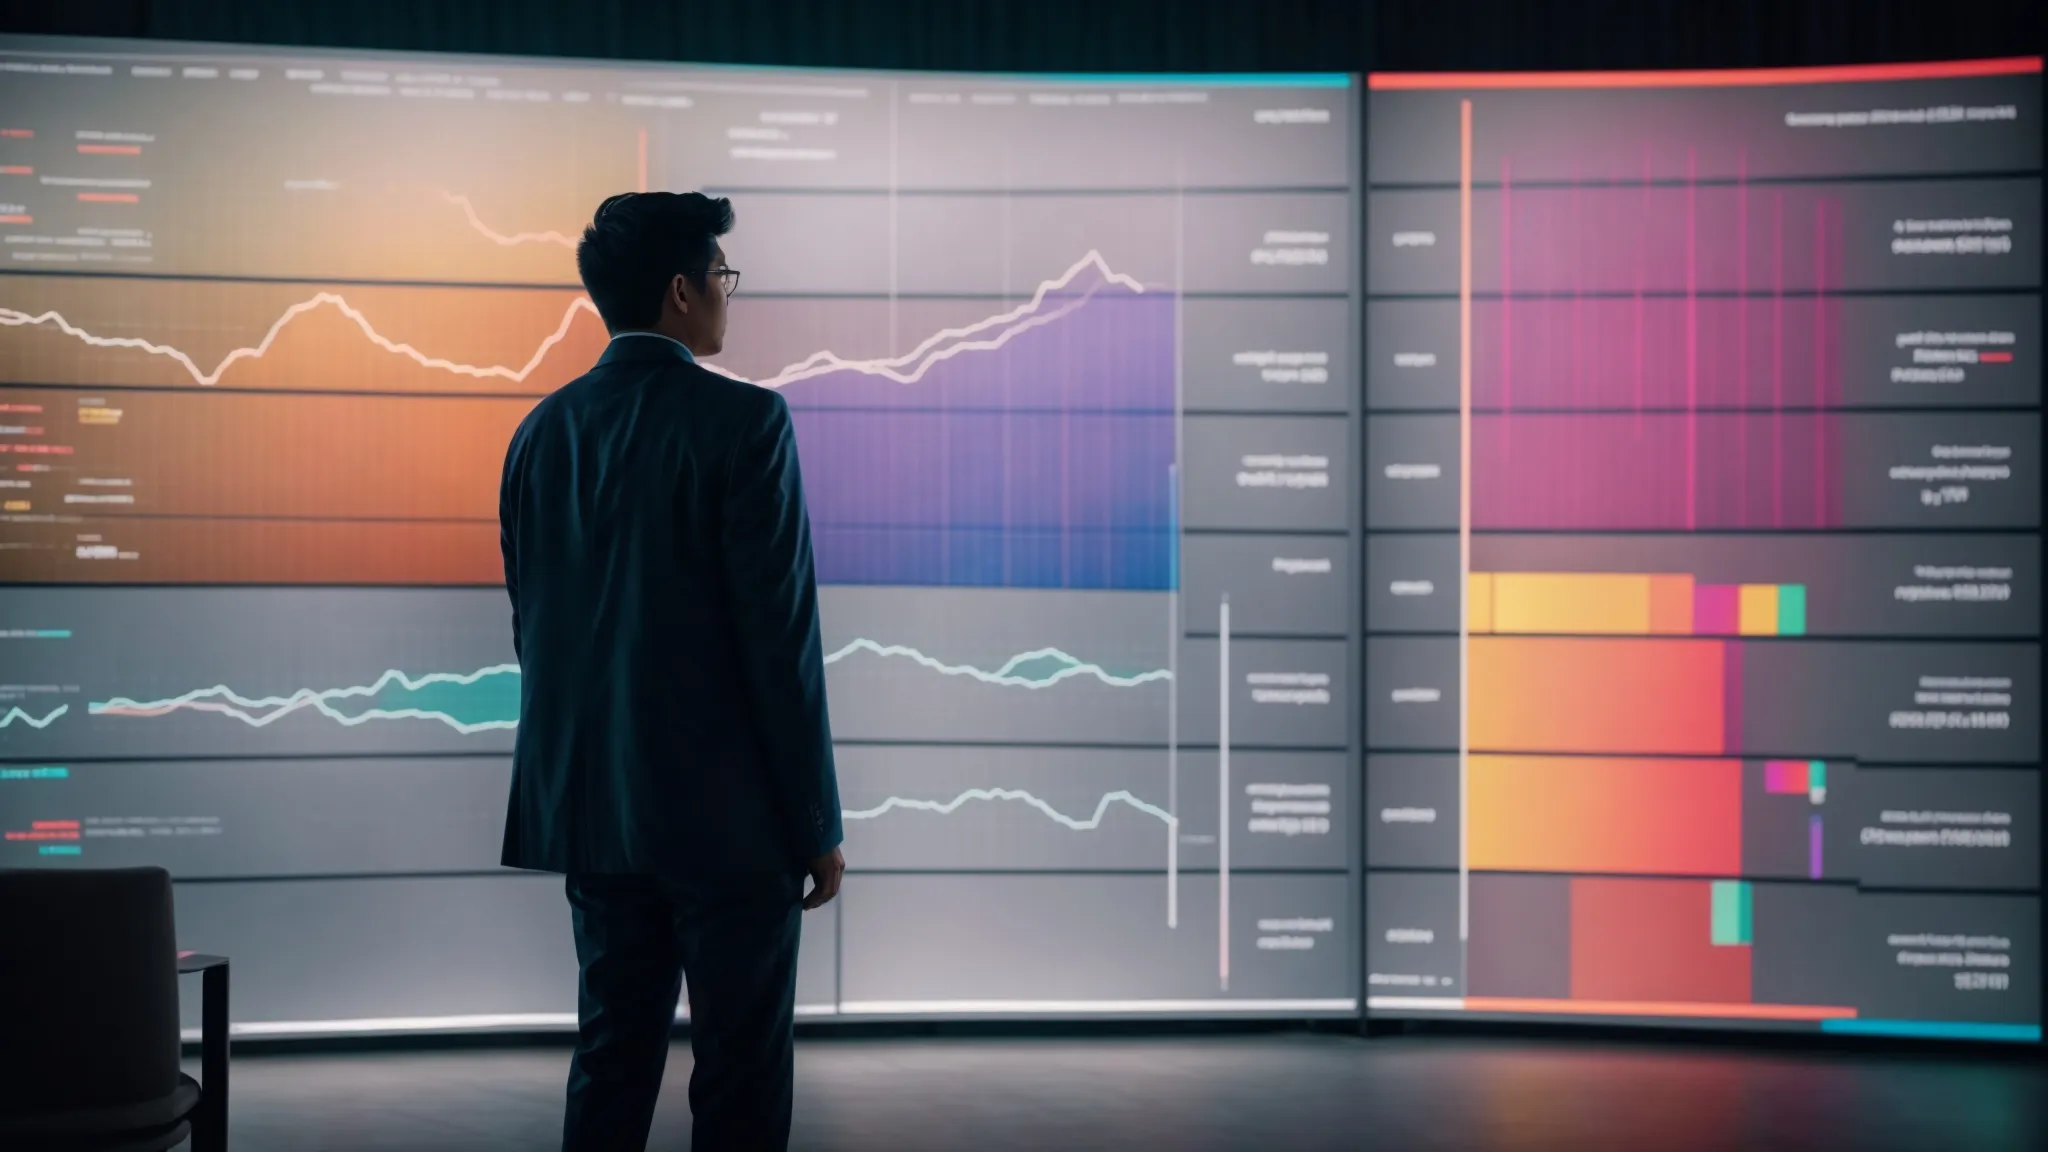 a person stands before a large, interactive screen displaying colorful graphs and data charts, thoughtfully analyzing the information.